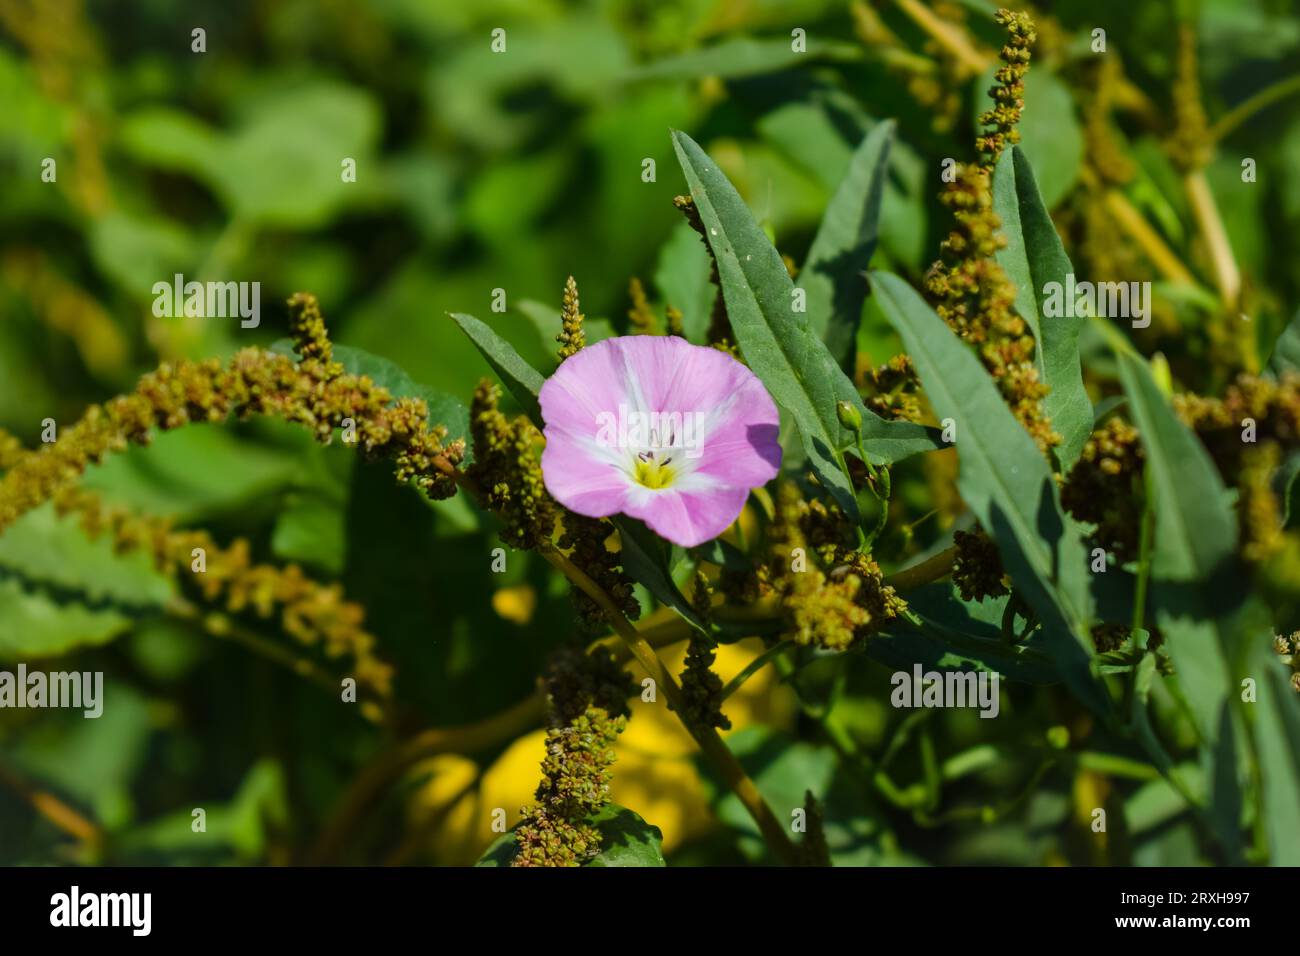 European bindweed or Creeping Jenny or Possession vine herbaceous perennial plant with open and closed white flowers surrounded with dense green leave Stock Photo